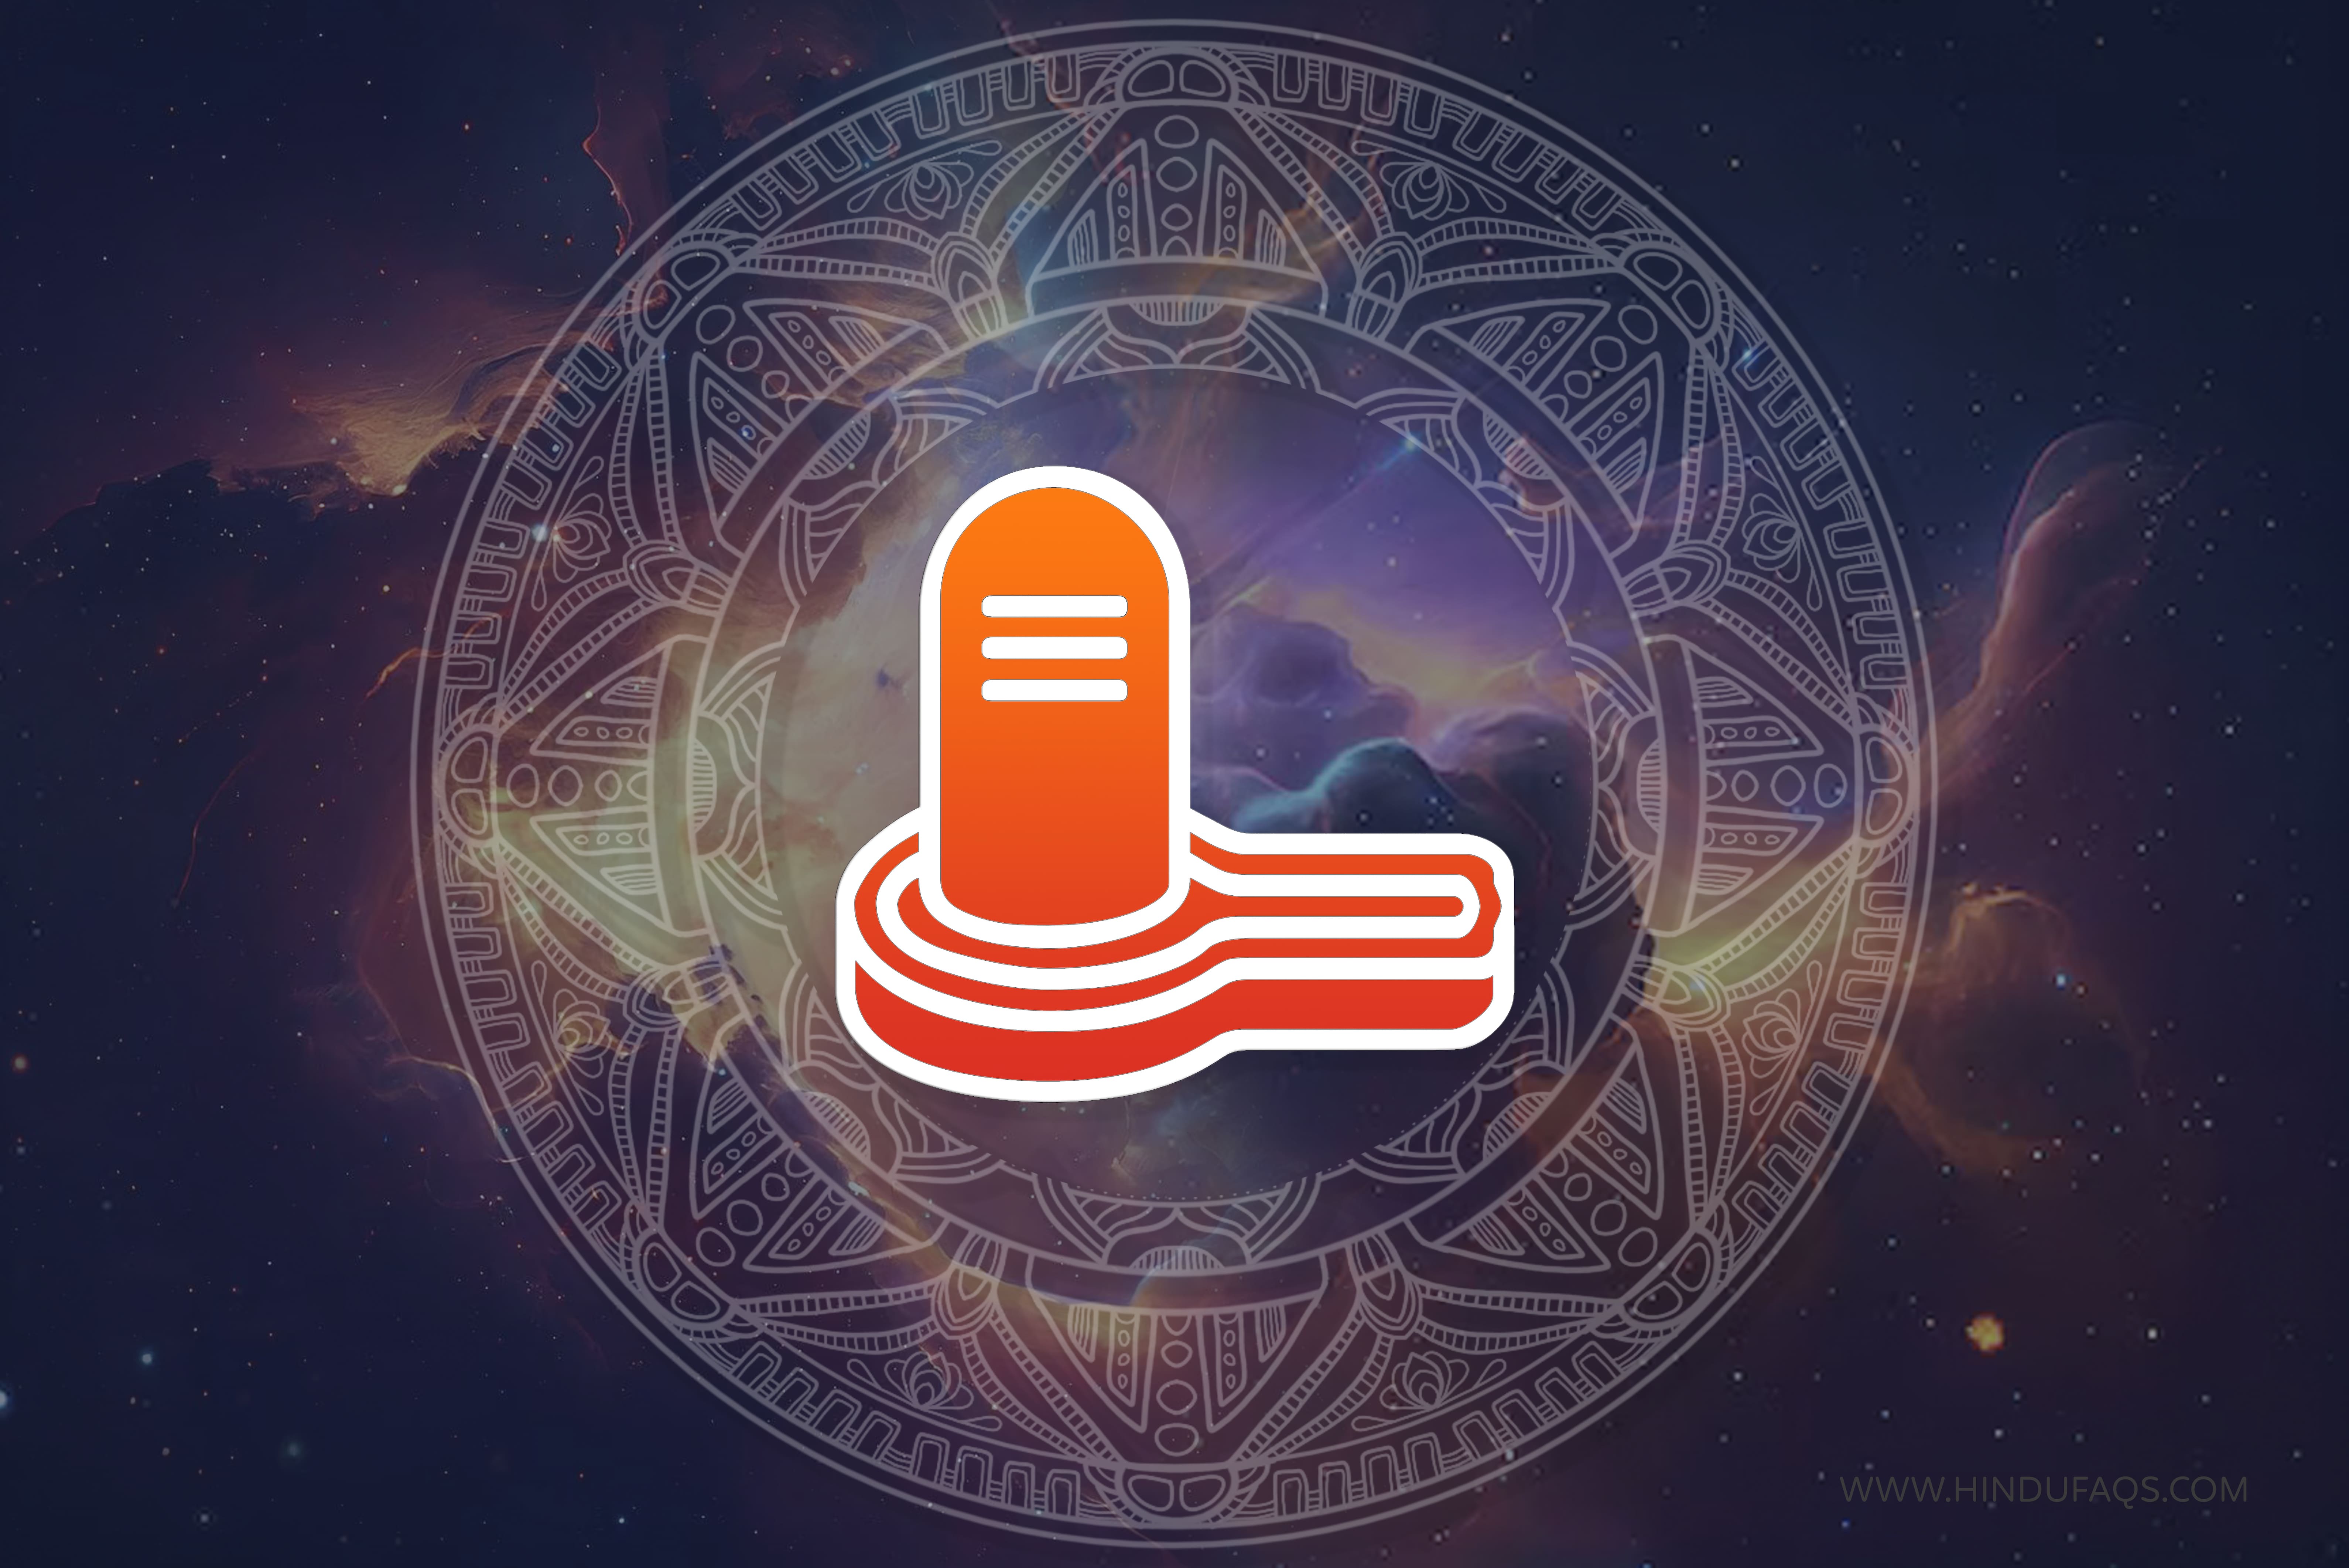 Shiv Ling (शिवलिंग) - Represents the cosmic pillar of energy and consciousness from which the entire universe emerges - HD Wallpaper - HinfuFaqs